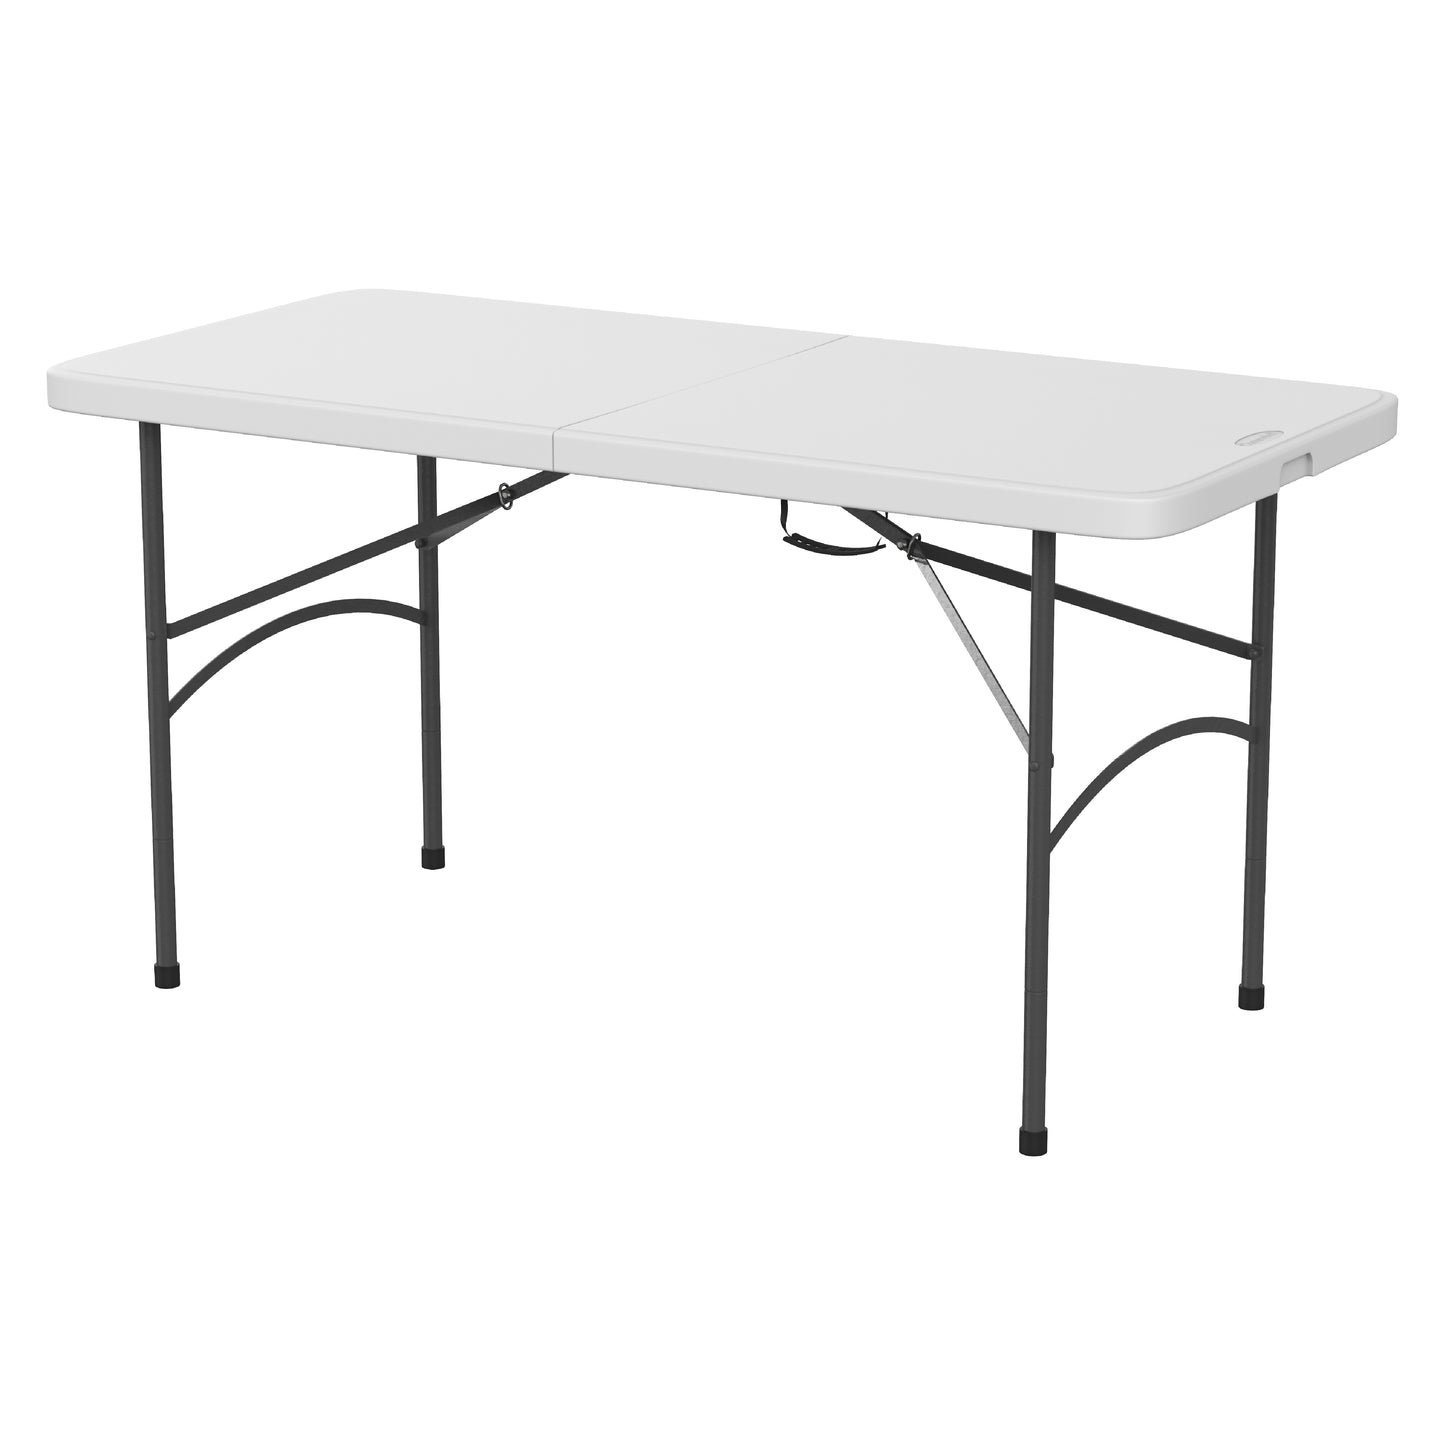 122 cm Folding Picnic Table with Steel Legs